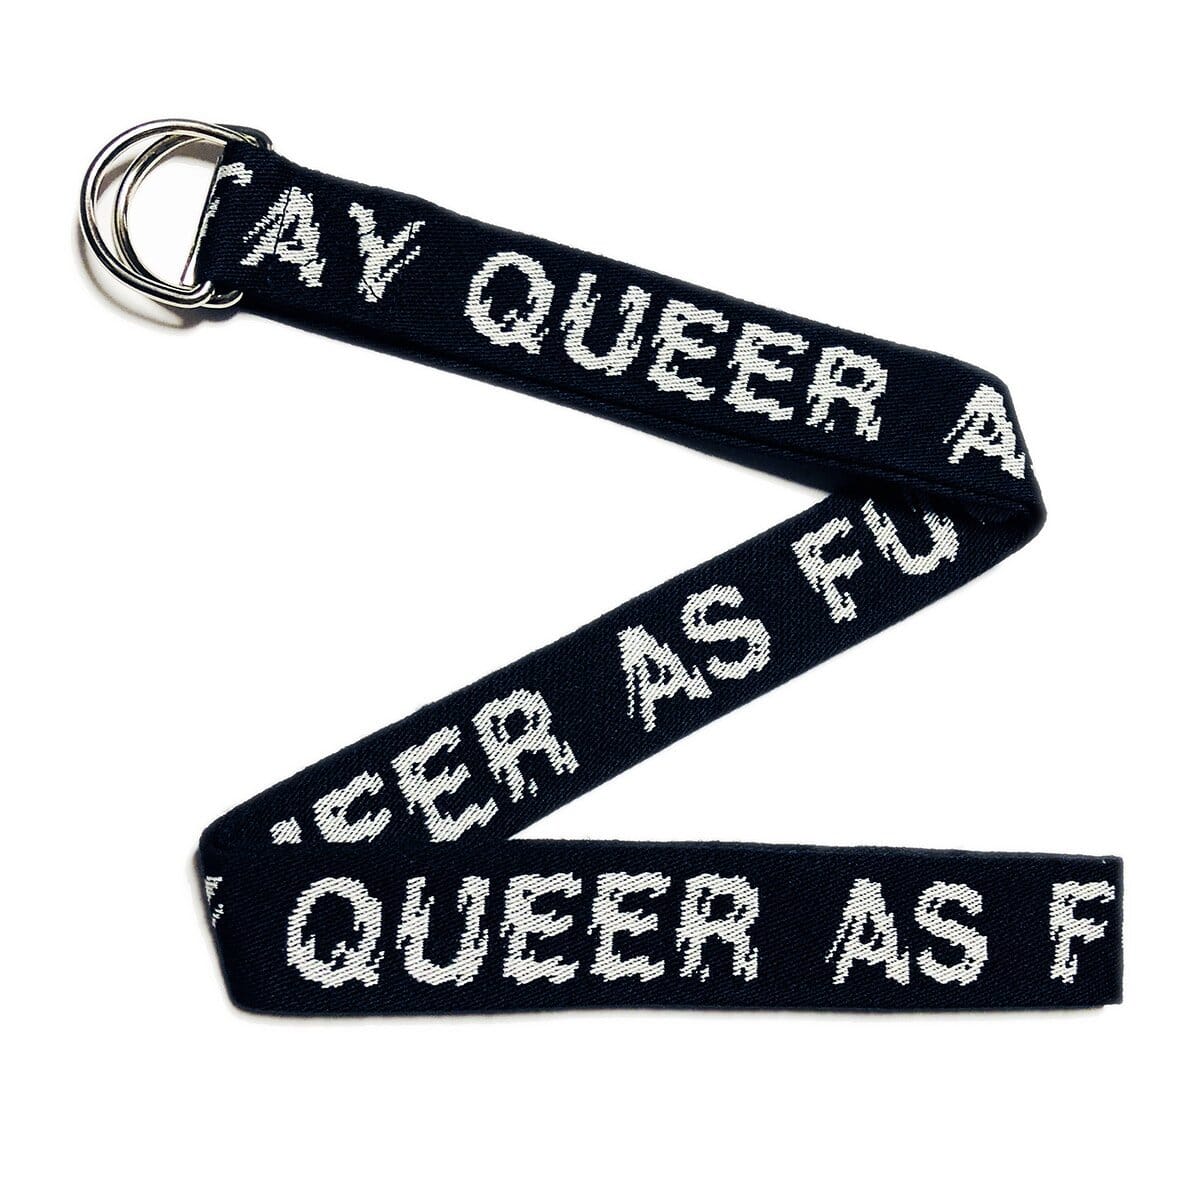 Stay Queer As F**K Double D Buckle Belt